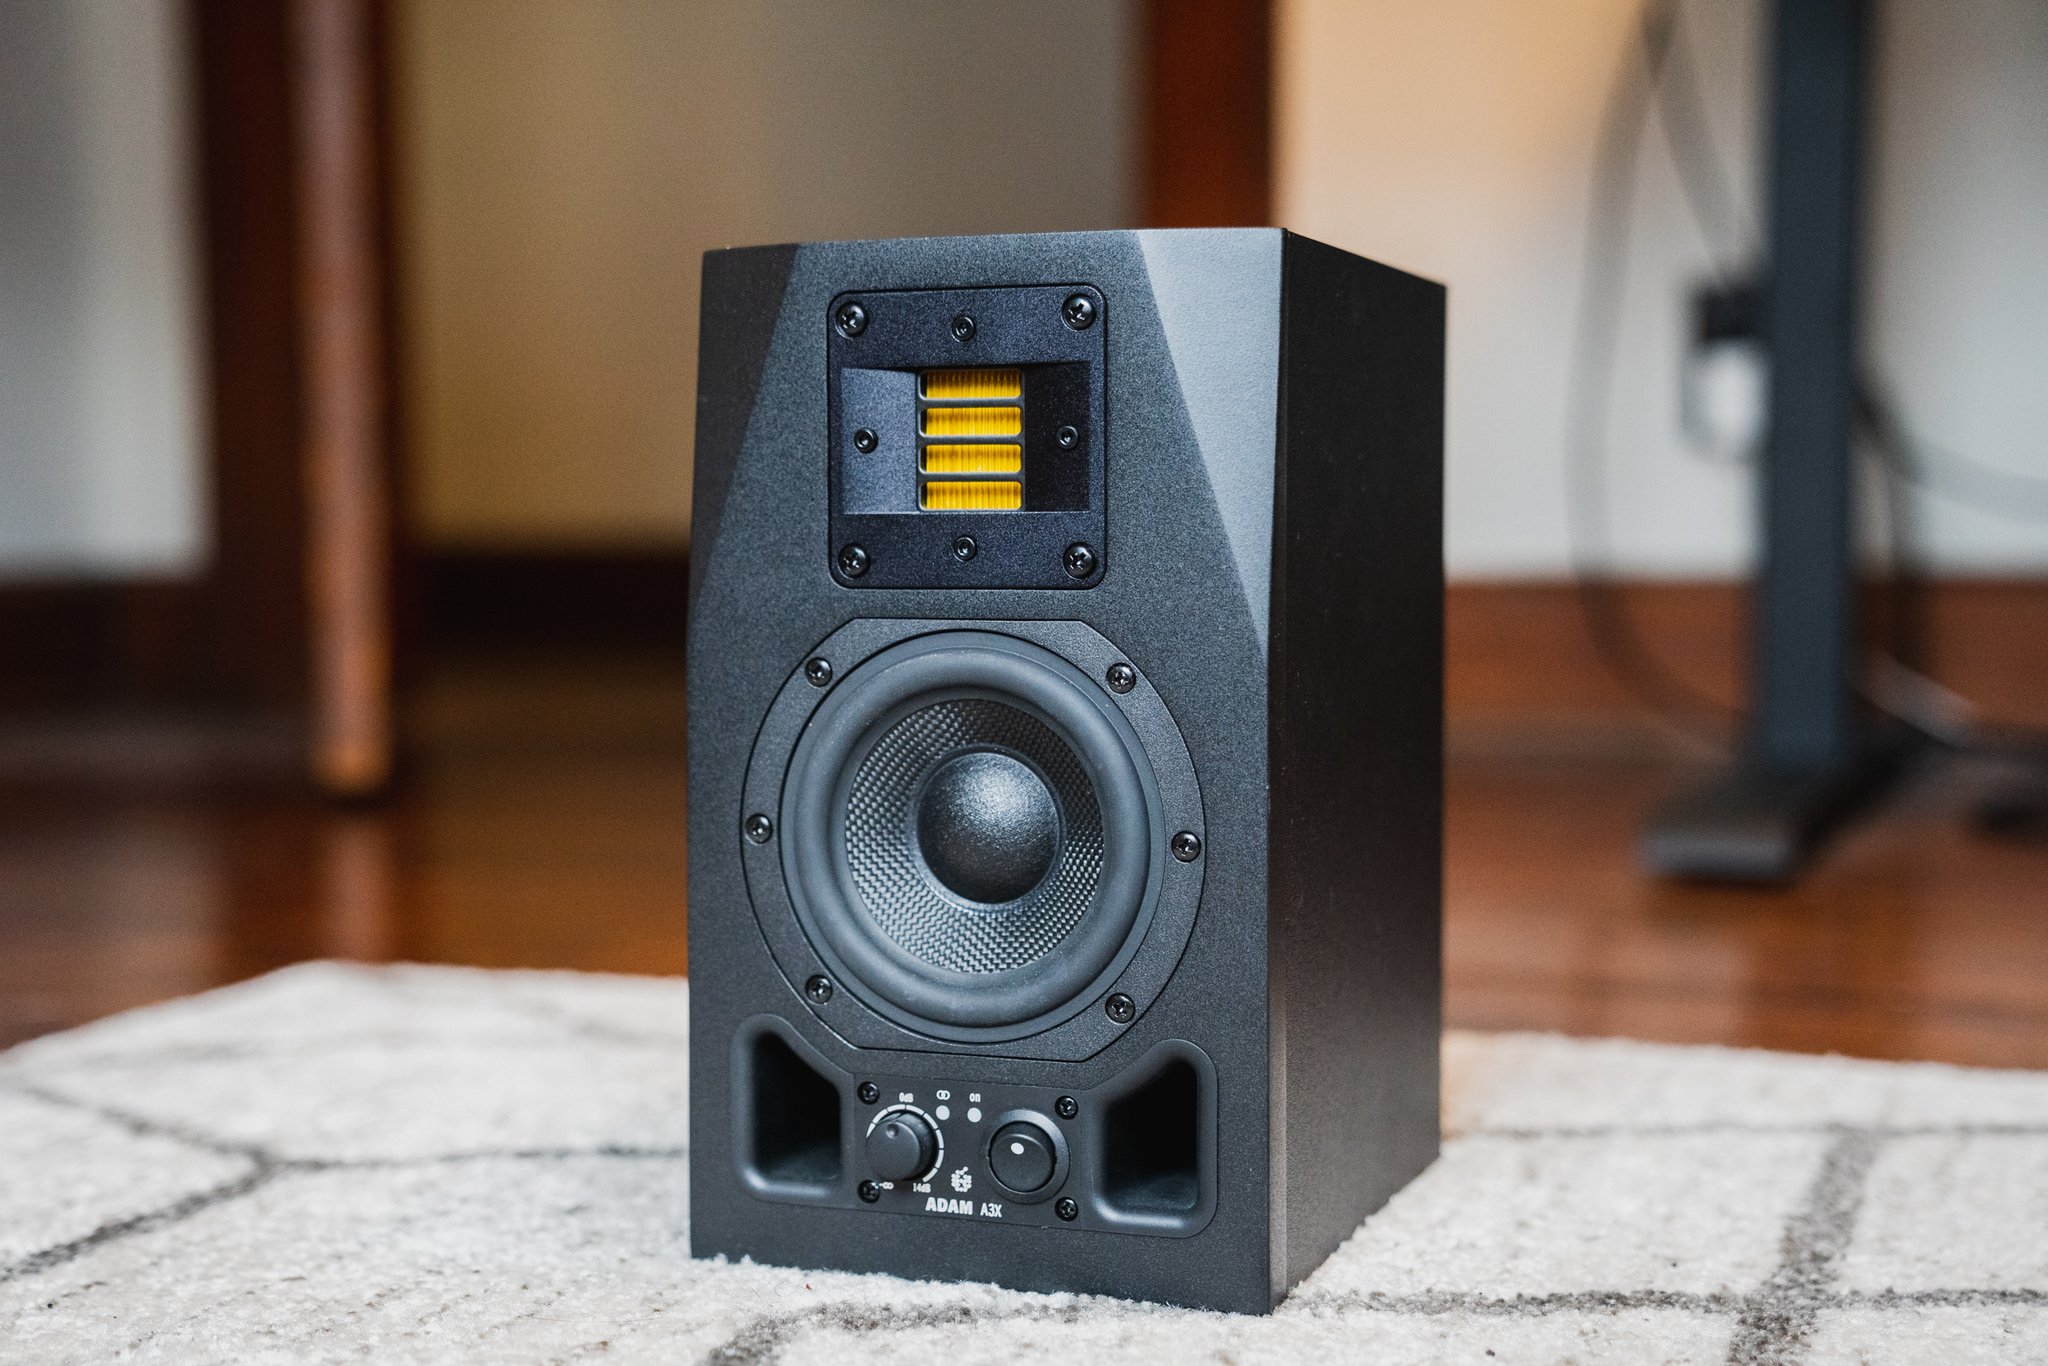 The Adam A3X speakers are the work-from-home accessory I can't go